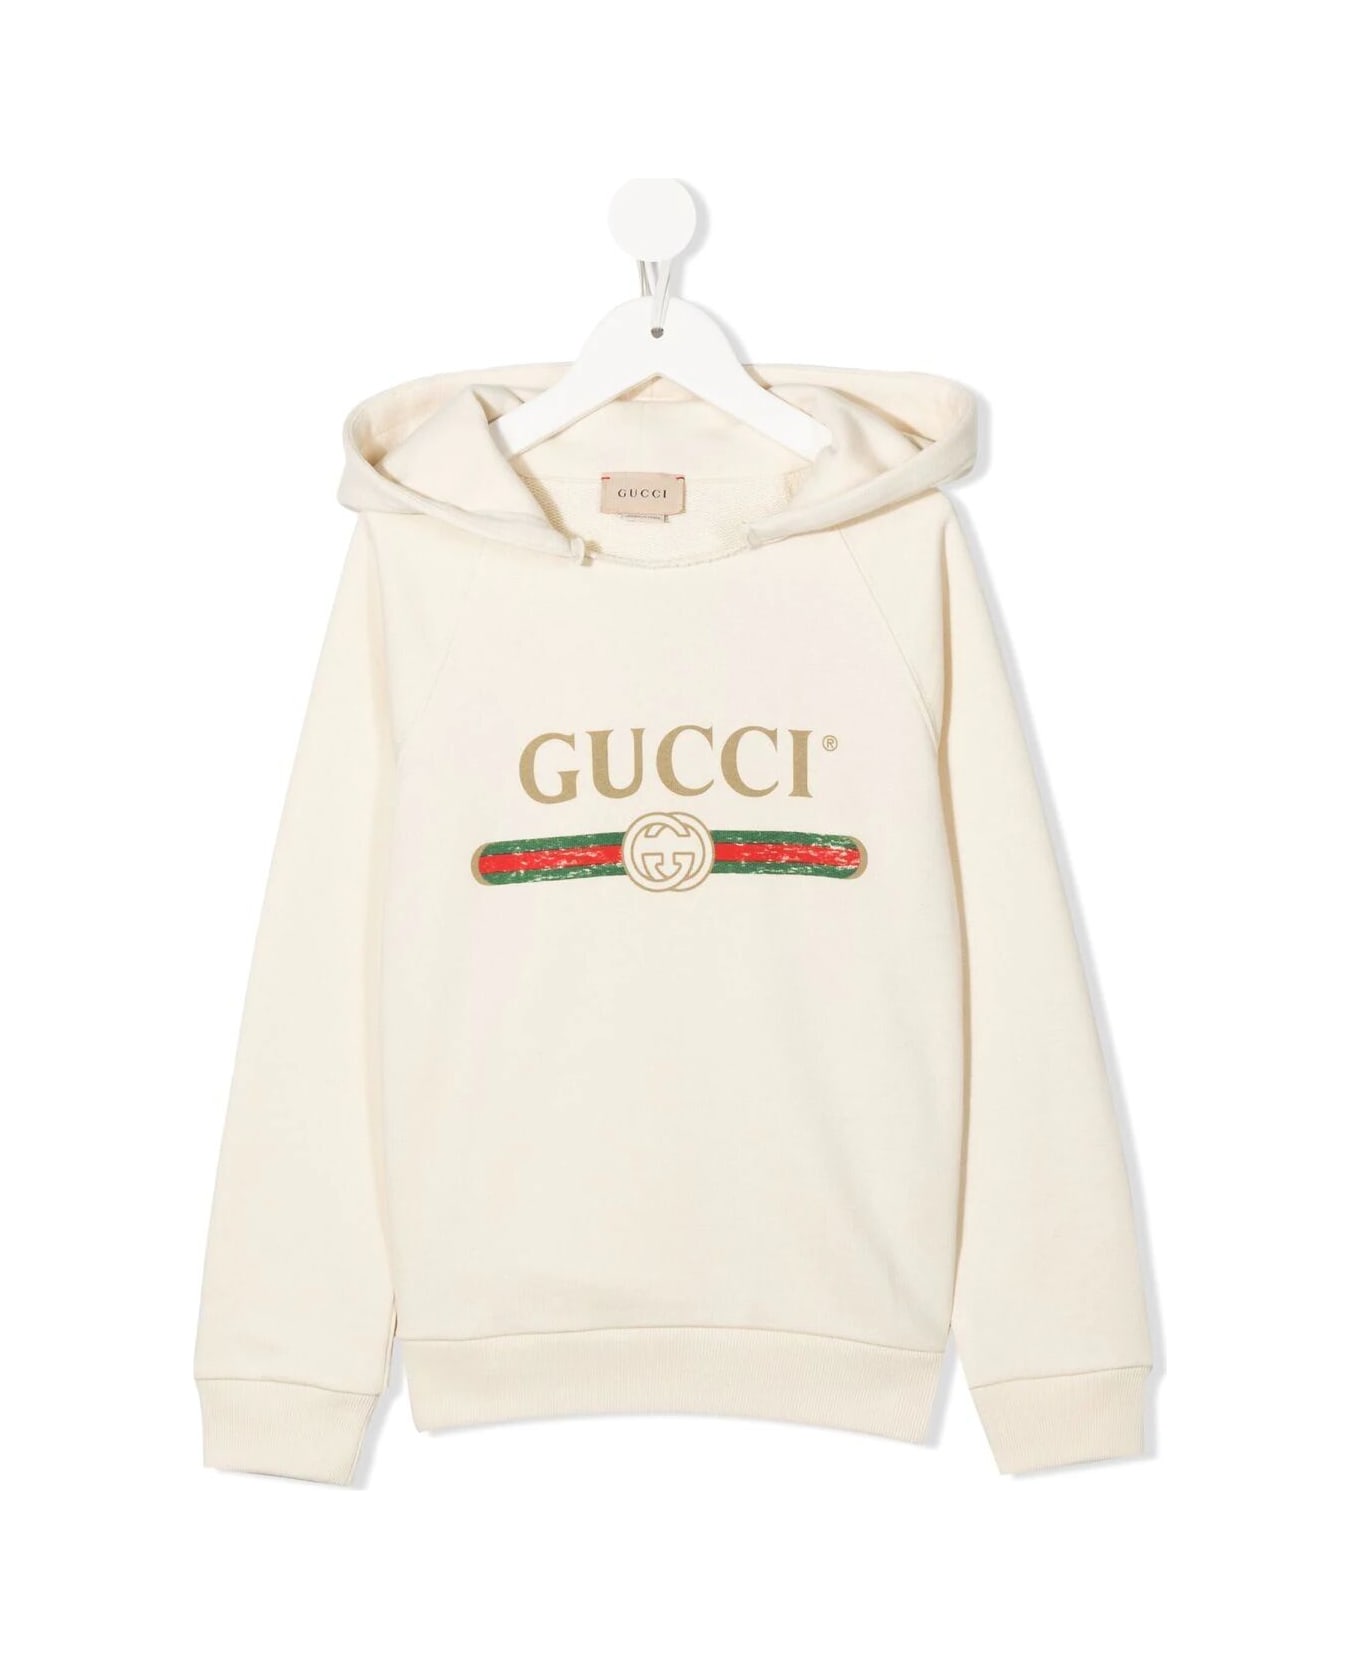 Gucci Sweatshirt With Hood Felted Cotton Jersey - White Green Red